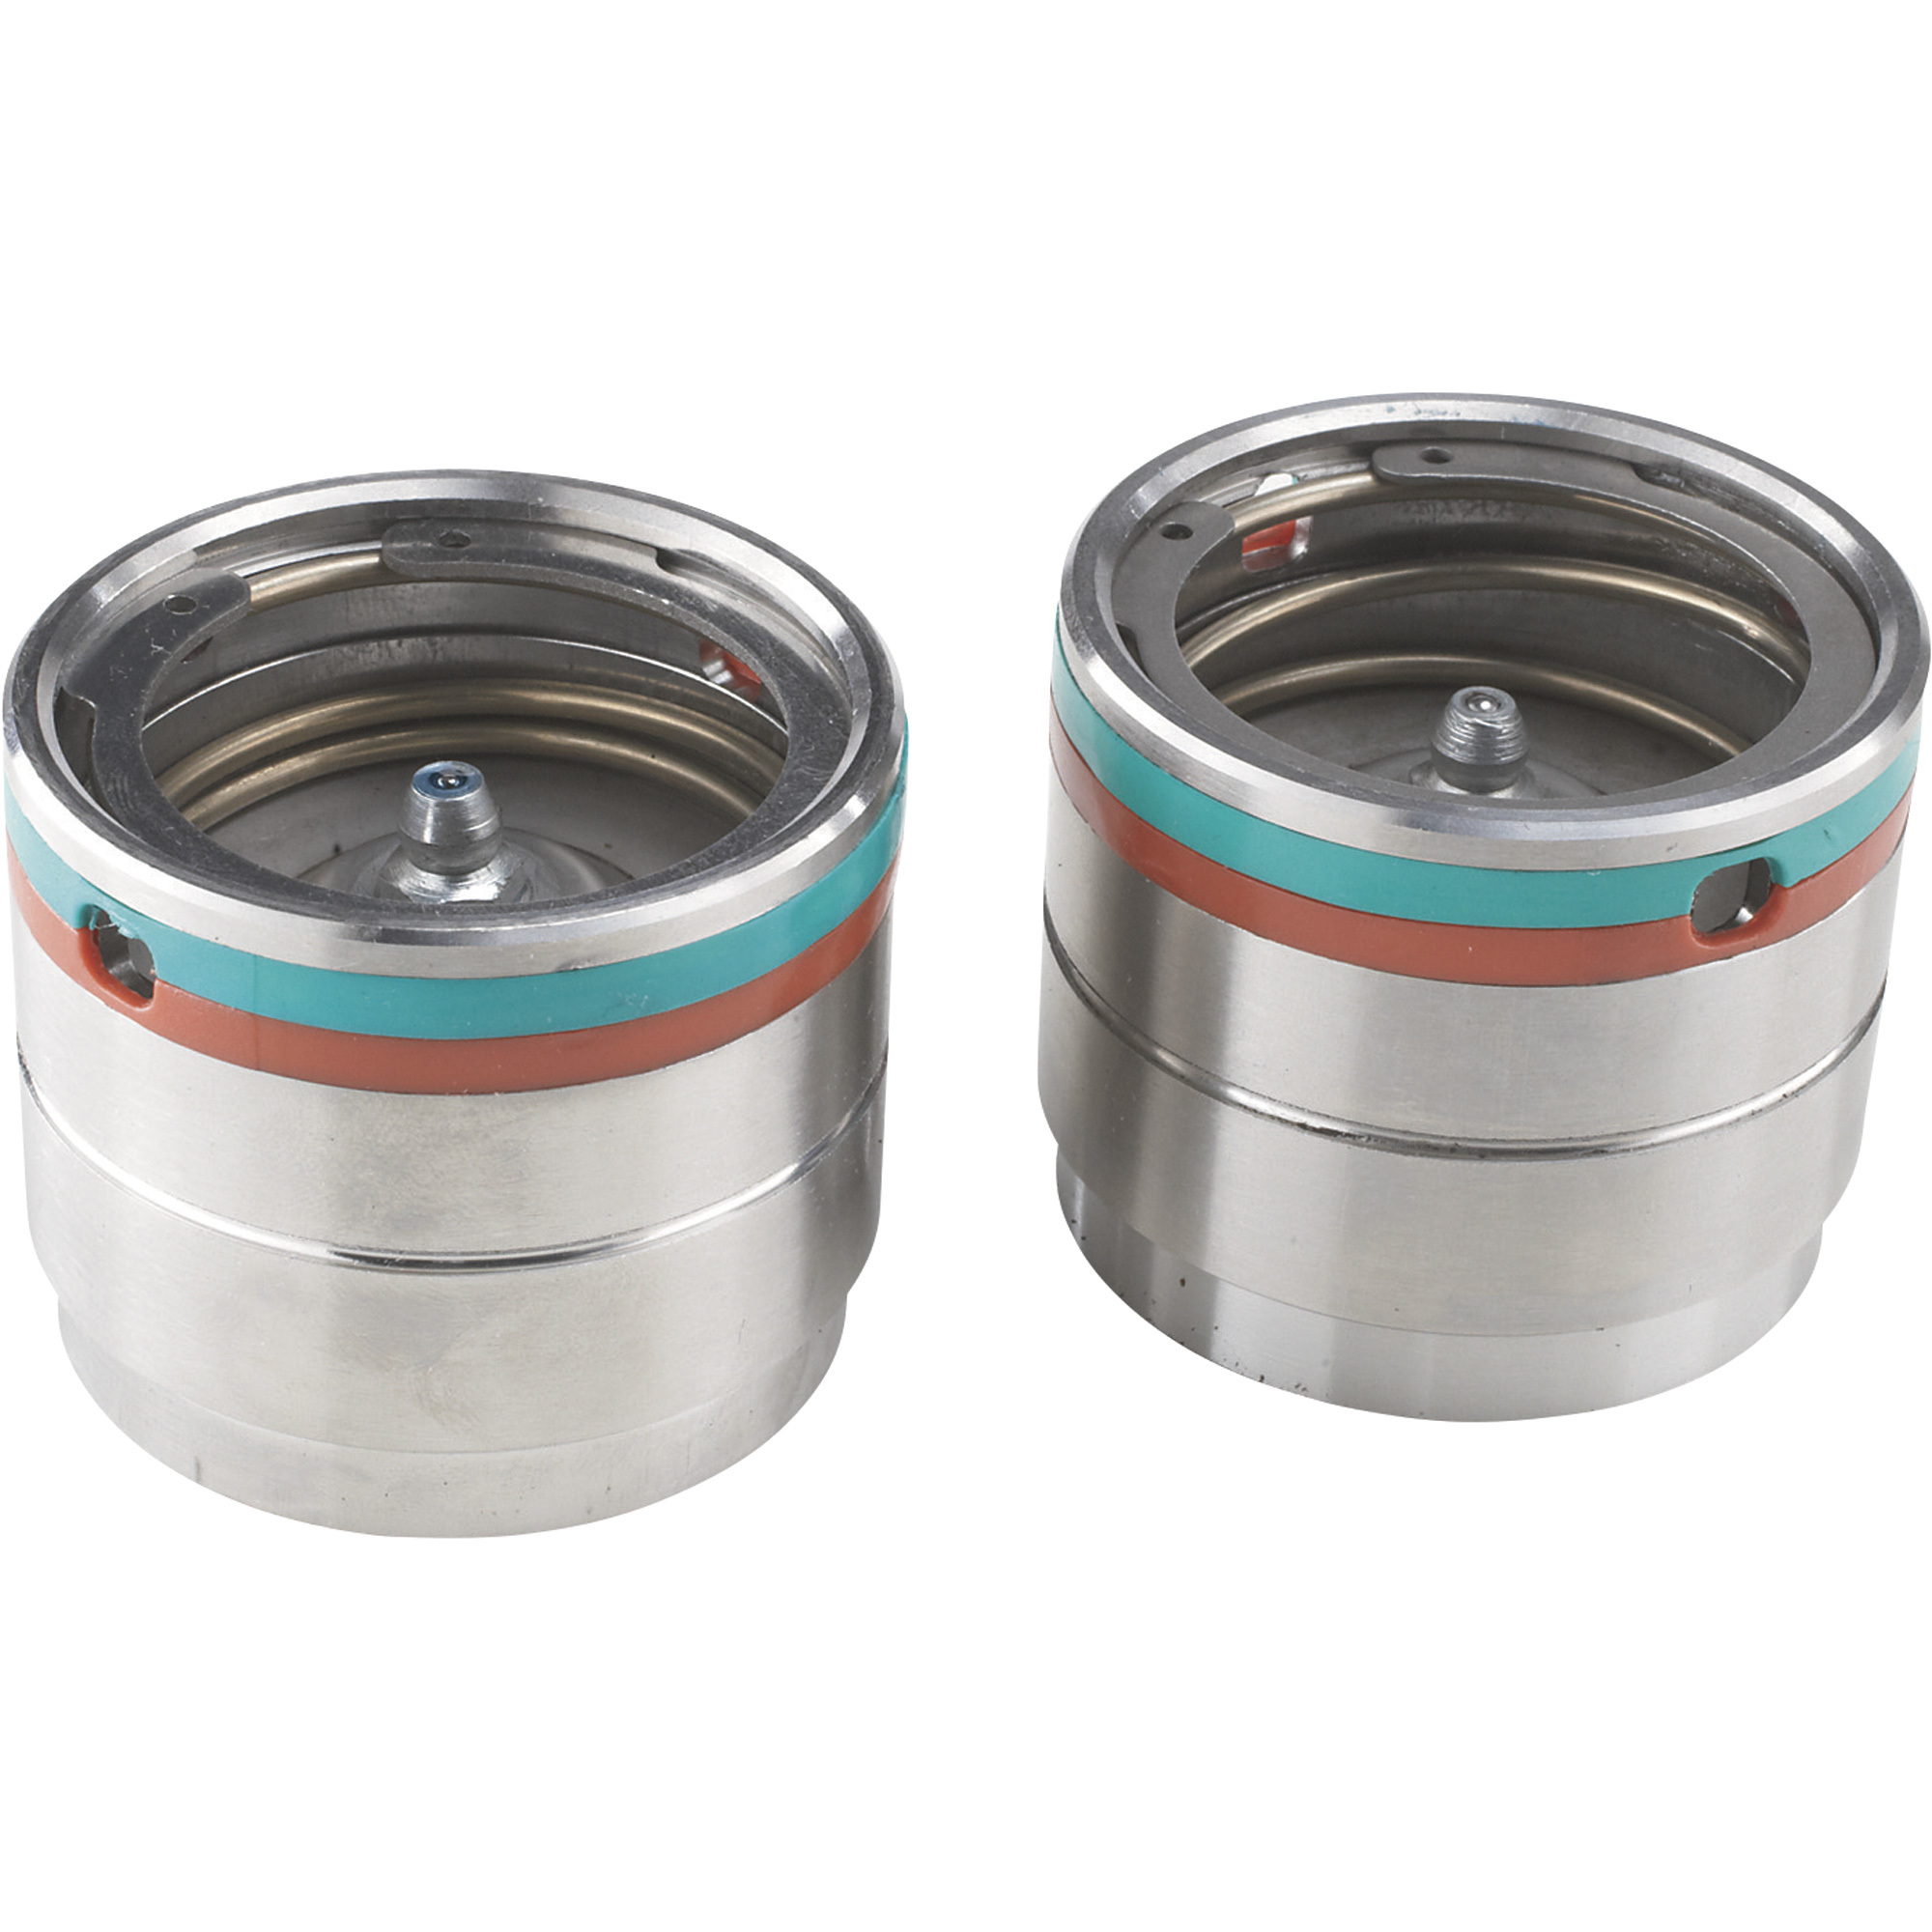 Ultra-Tow High-Performance Trailer Bearing Protectors â Pair, Fits 2.328Inch Hubs, Stainless Steel, Model 5712942